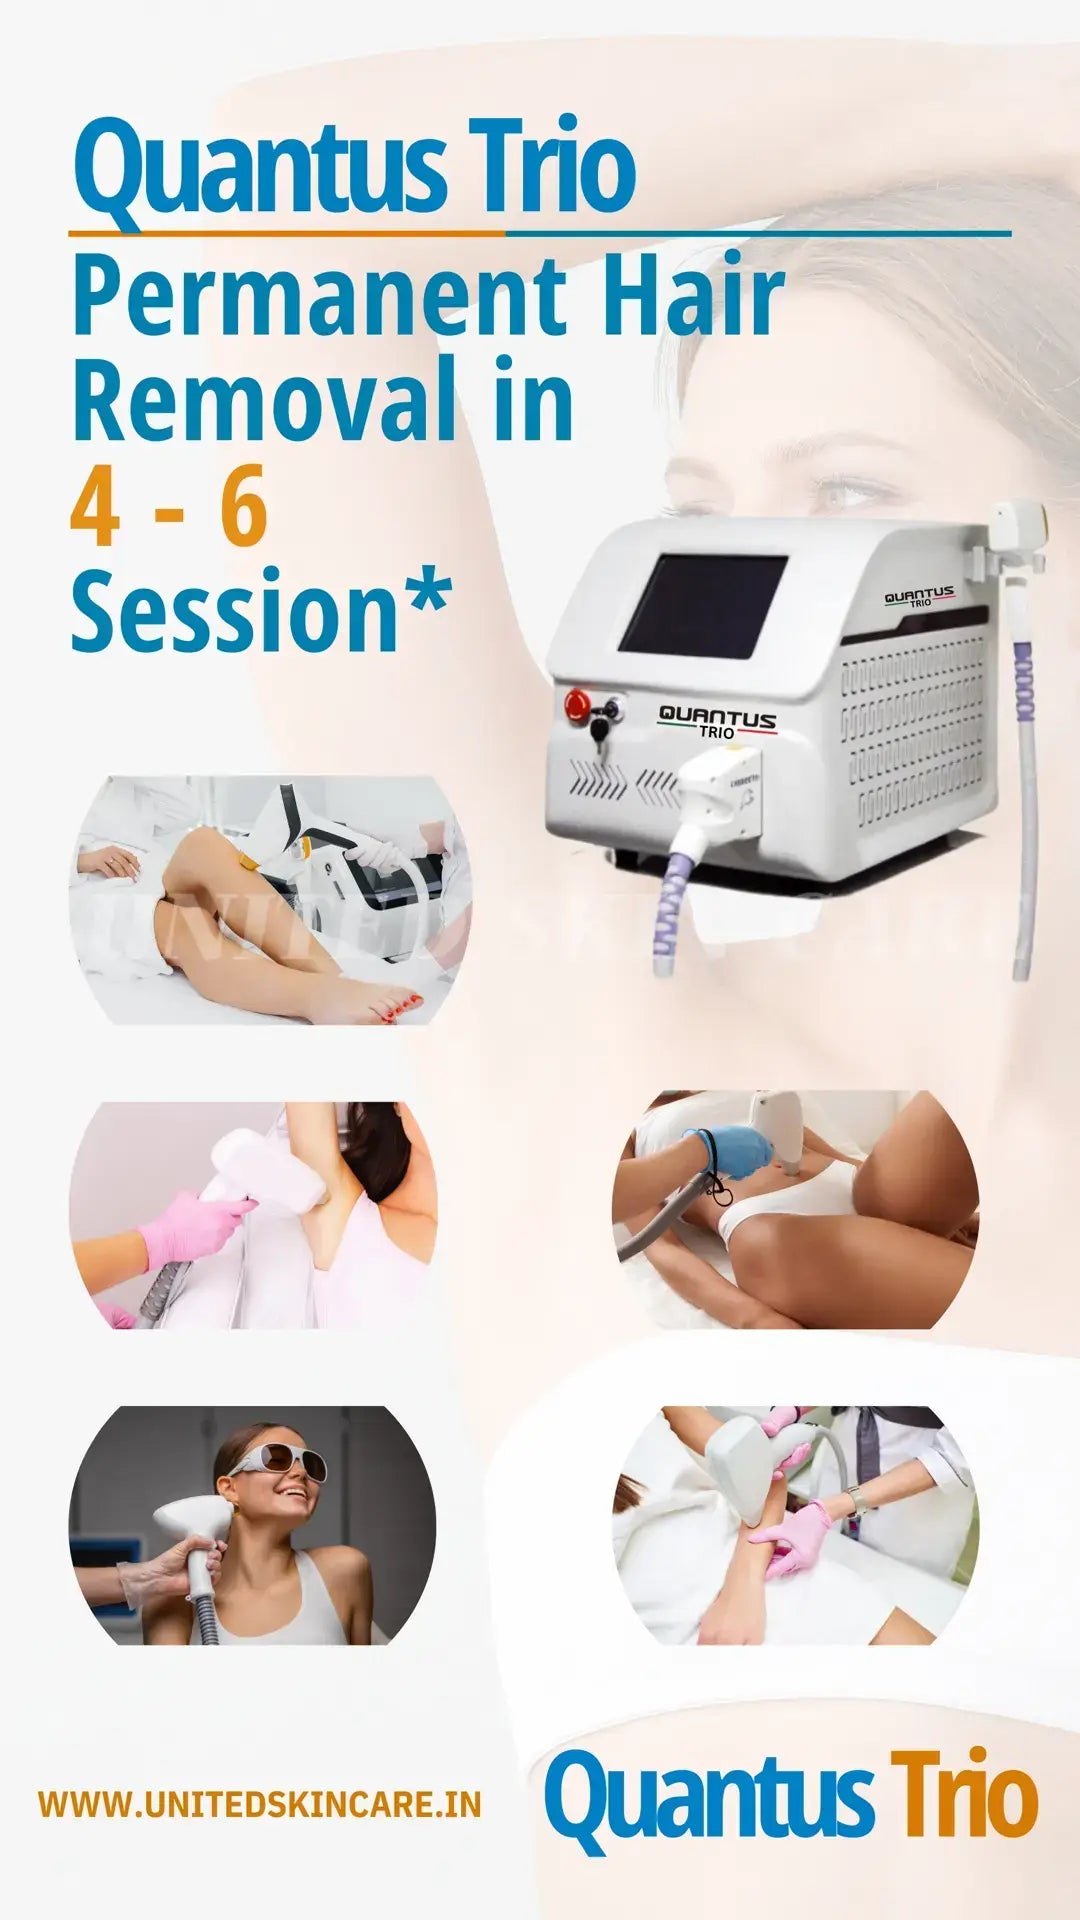 Quantus Trio Fda approved 1000w Triple wave Portable Diode Laser With Hyper Cooling Technology . FDA/CE Approved Medical Laser 3 wavelength 755nm 808nm 1064nm Diode Laser Hair Removal Machines